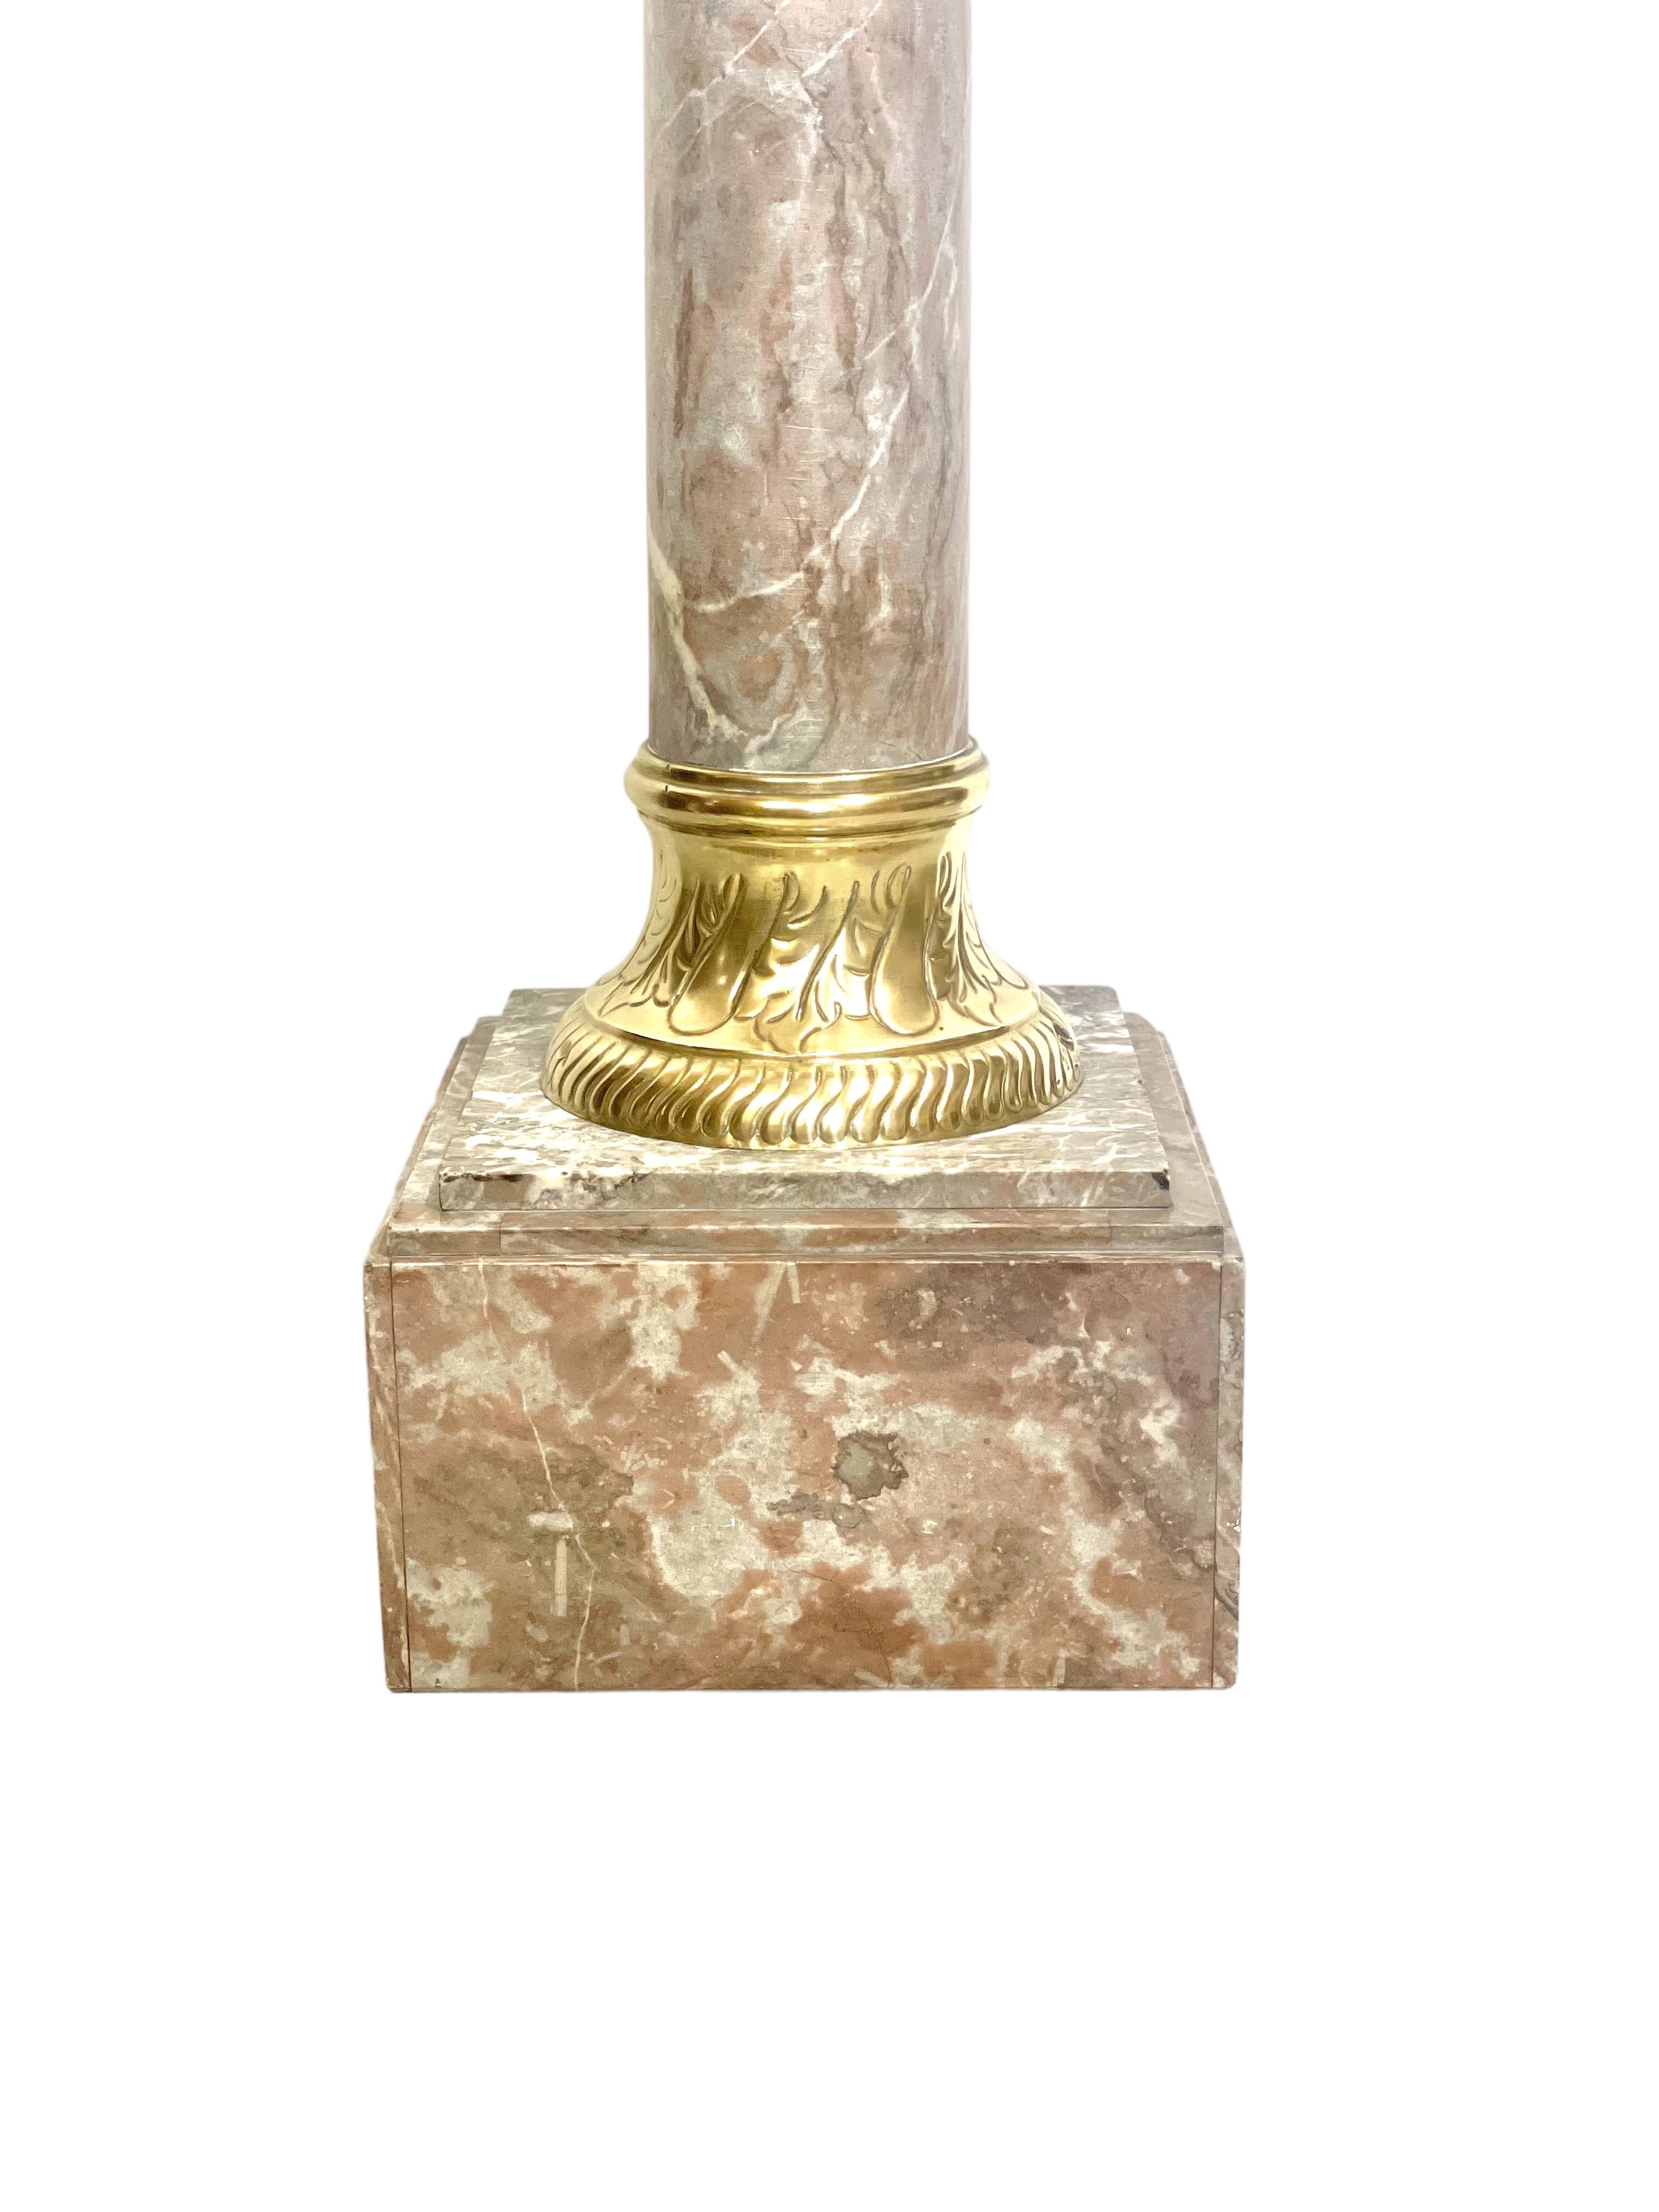 Grey Marble Pedestal with Gilt Bronze in a Louis XVI Style For Sale 3